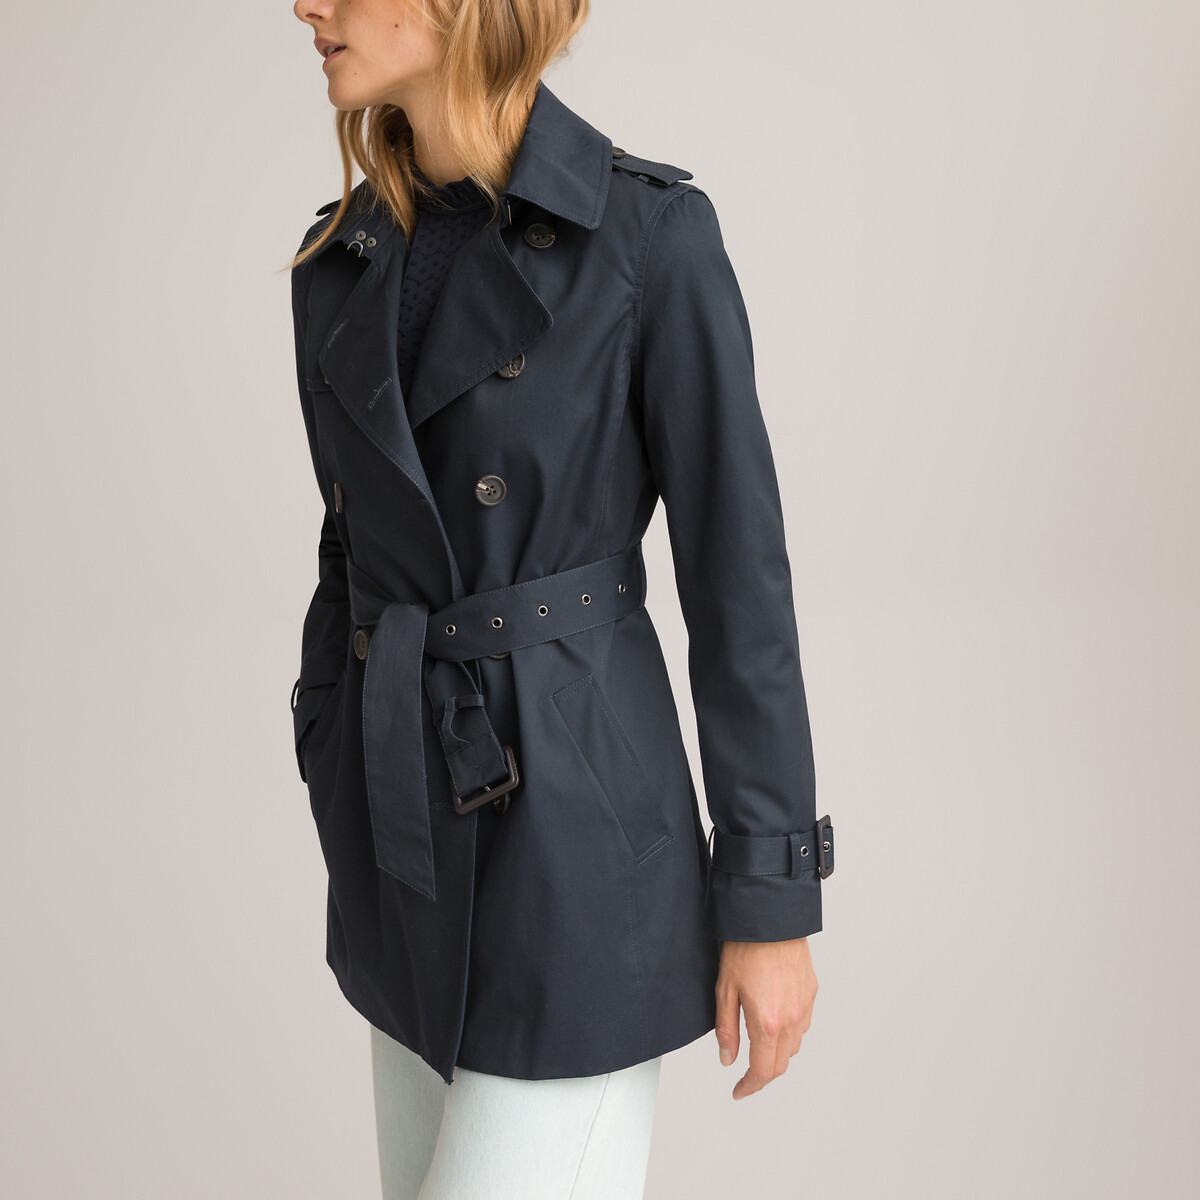 Bomuld mellemlang trenchcoat La Collections | La Redoute